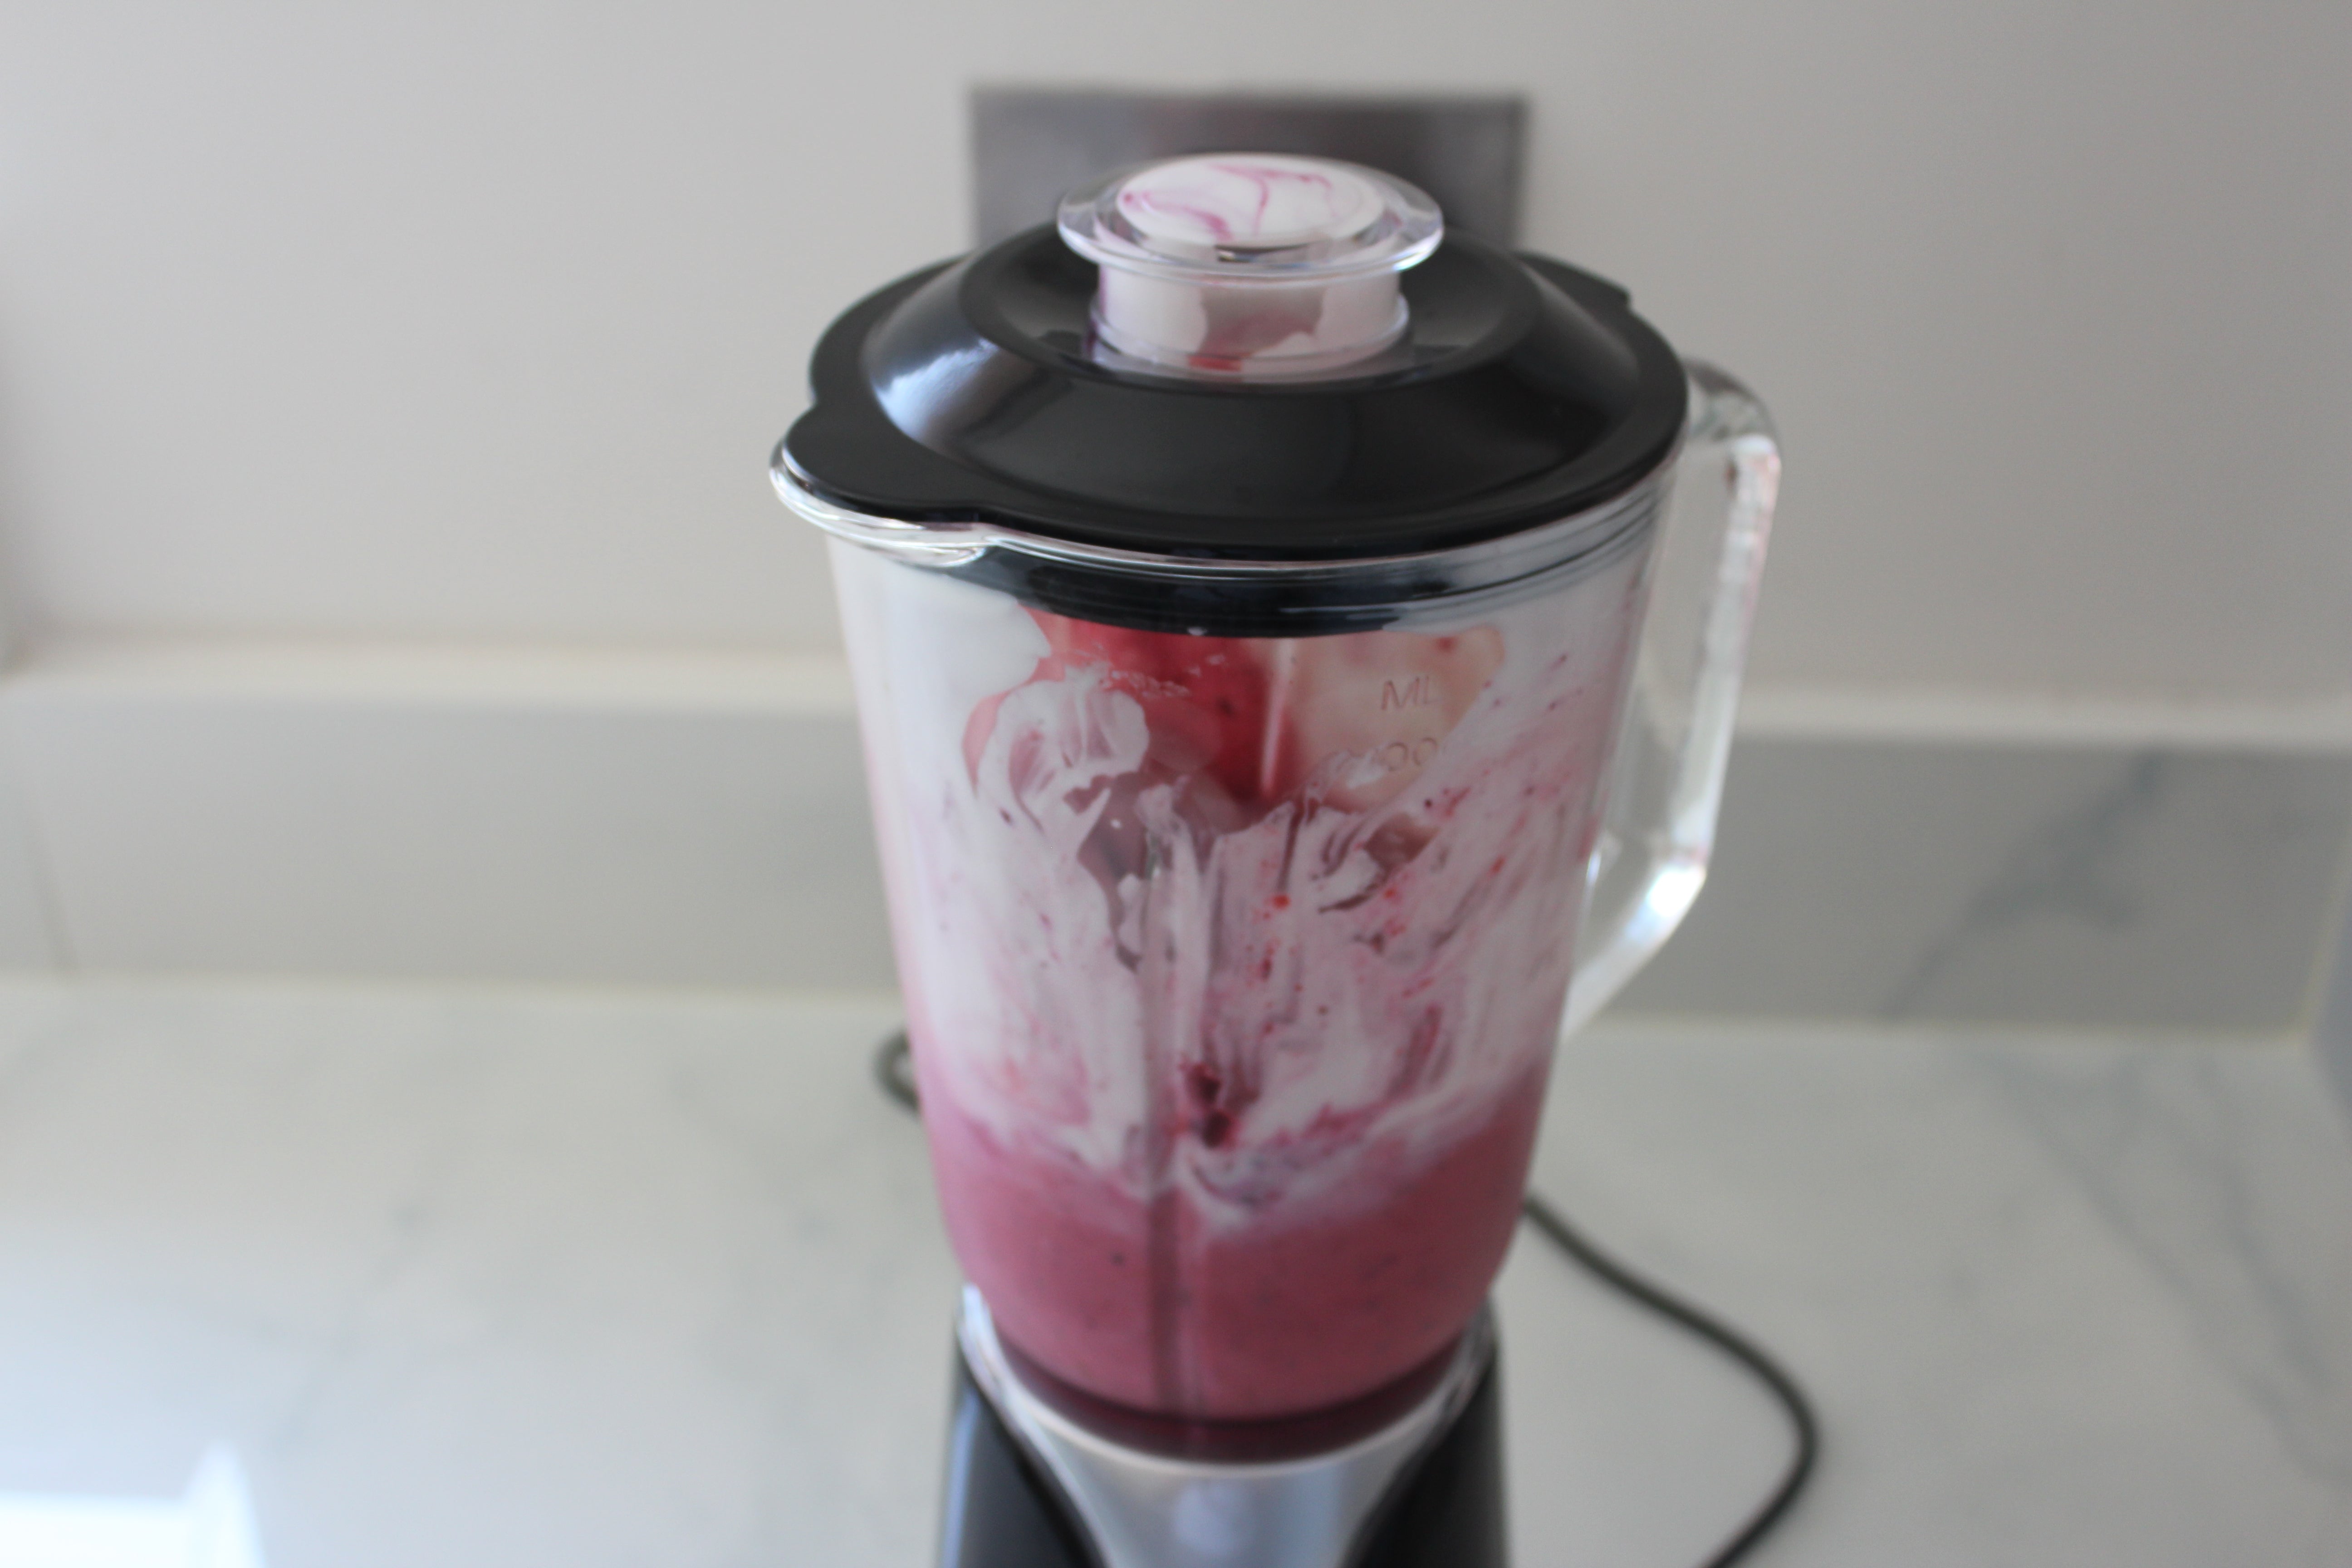 Weight Watchers blender with freshly made berry smoothie.